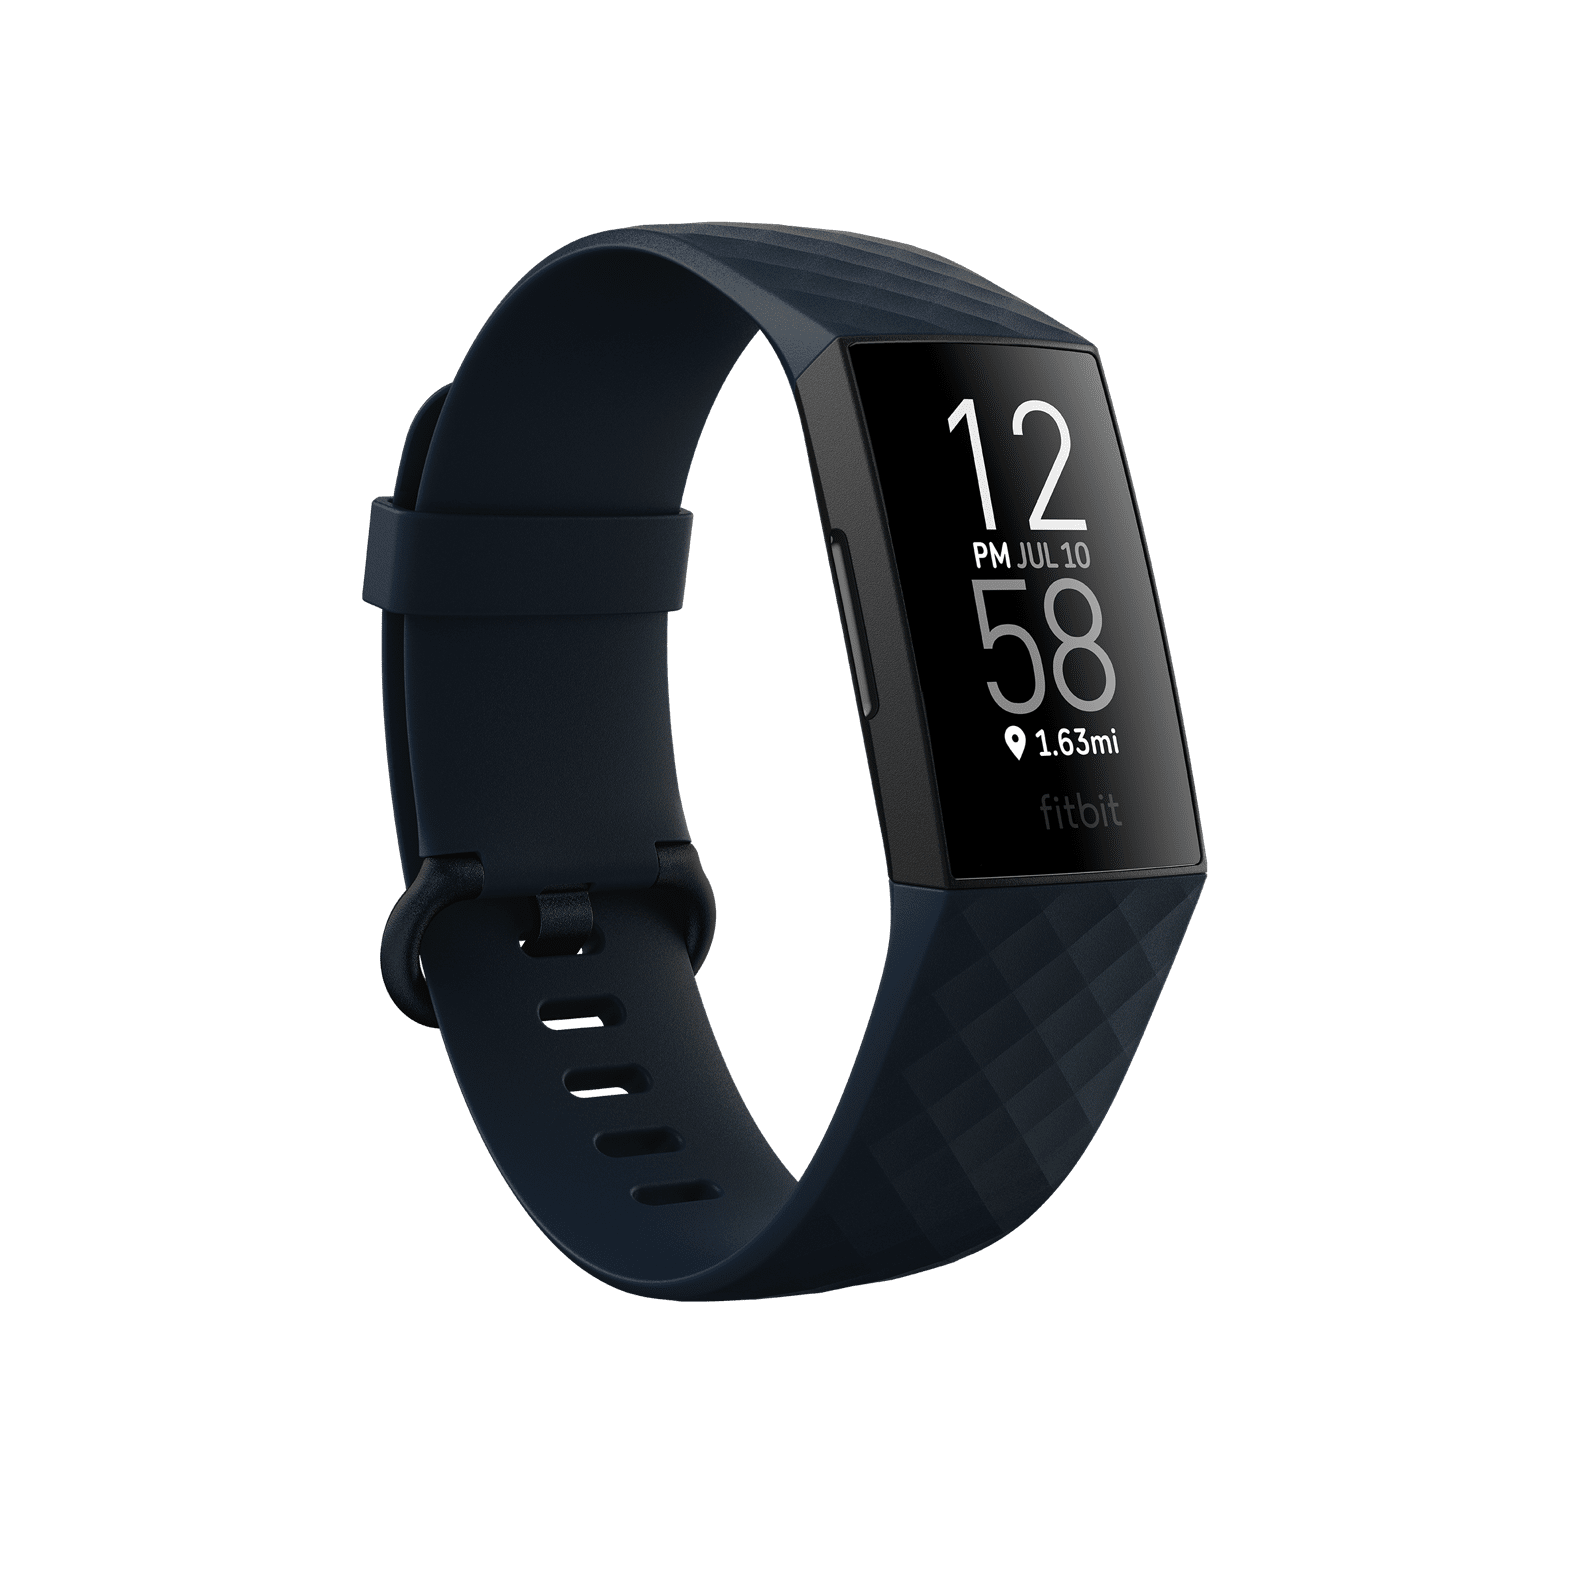 where to buy a fitbit